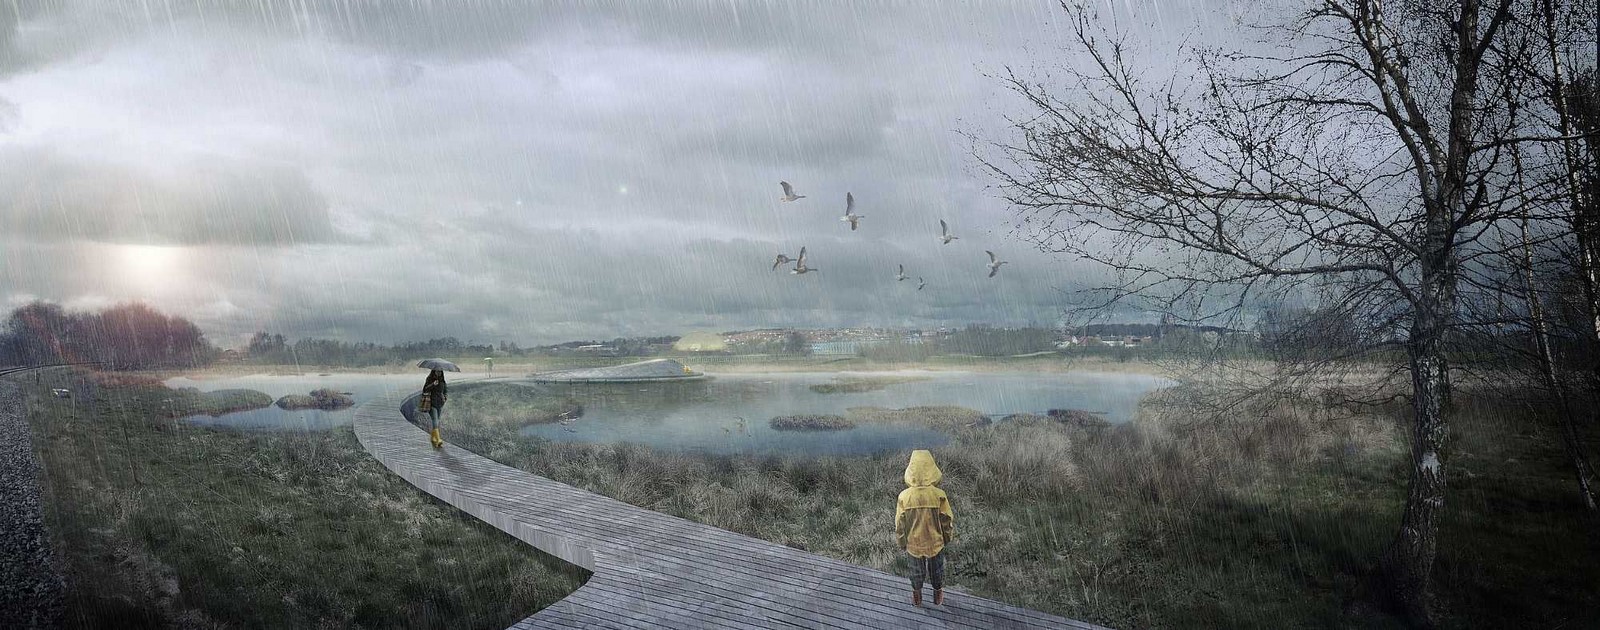 Architectural response to floods- Innovative design ideas for areas prone to flooding - Sheet